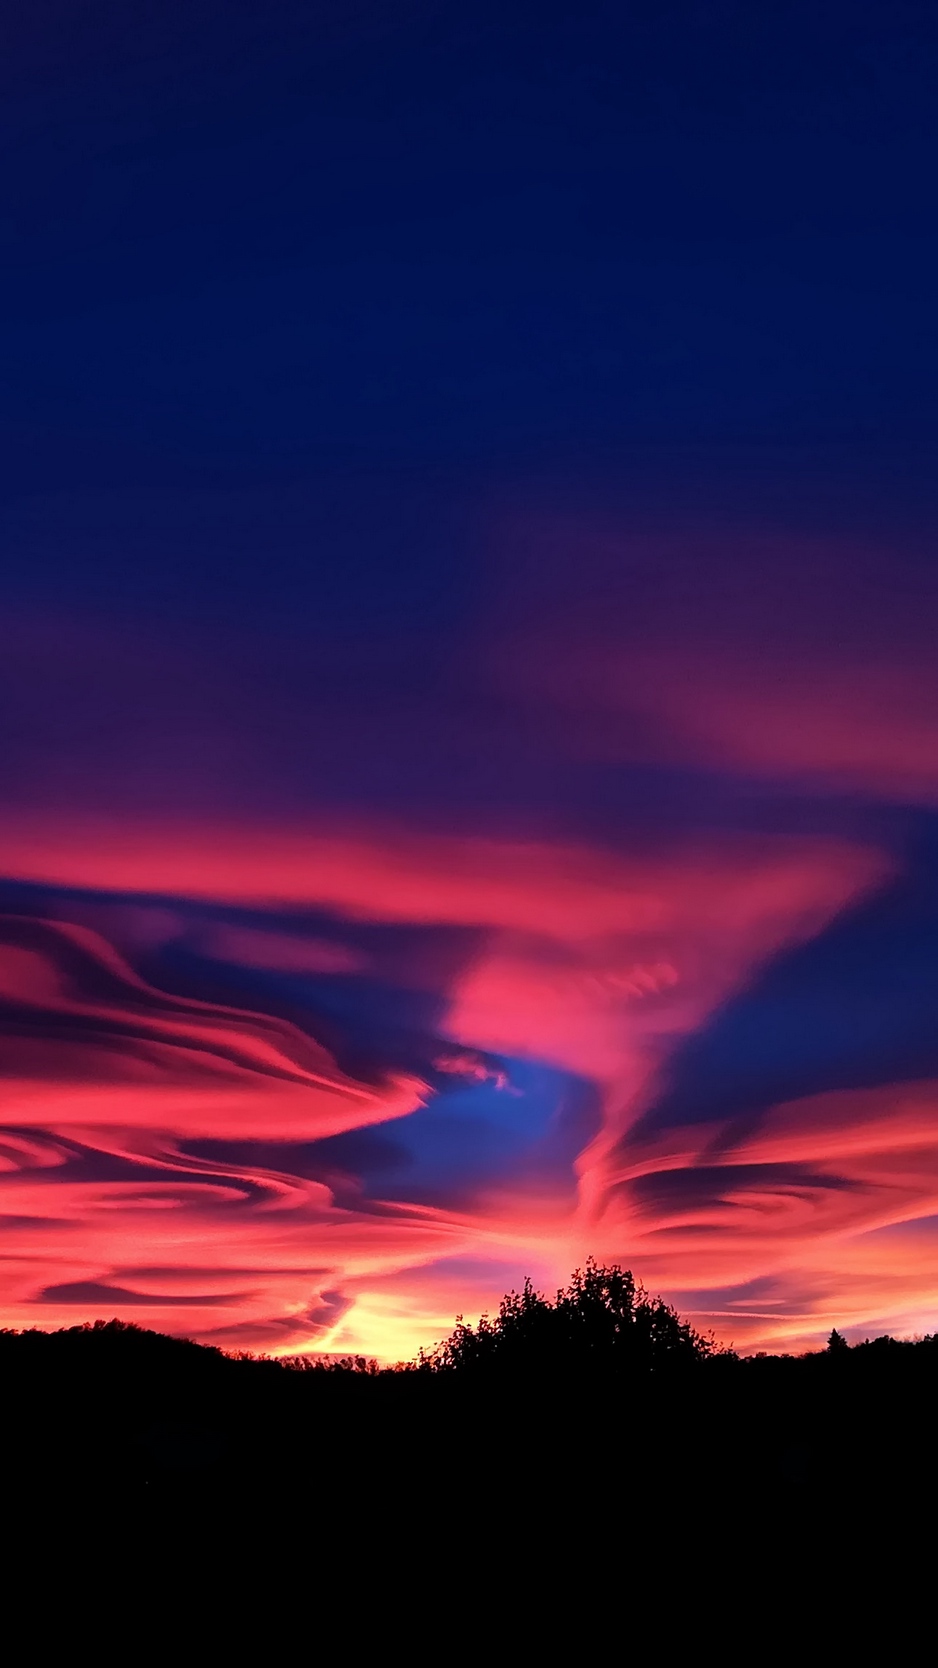 Free Download Download Wallpaper 938x1668 Sky Sunset Clouds Iphone 876s6 938x1668 For Your Desktop Mobile Tablet Explore 48 8 Iphone Wallpaper Sky 8 Iphone Wallpaper Sky Night Sky Wallpaper